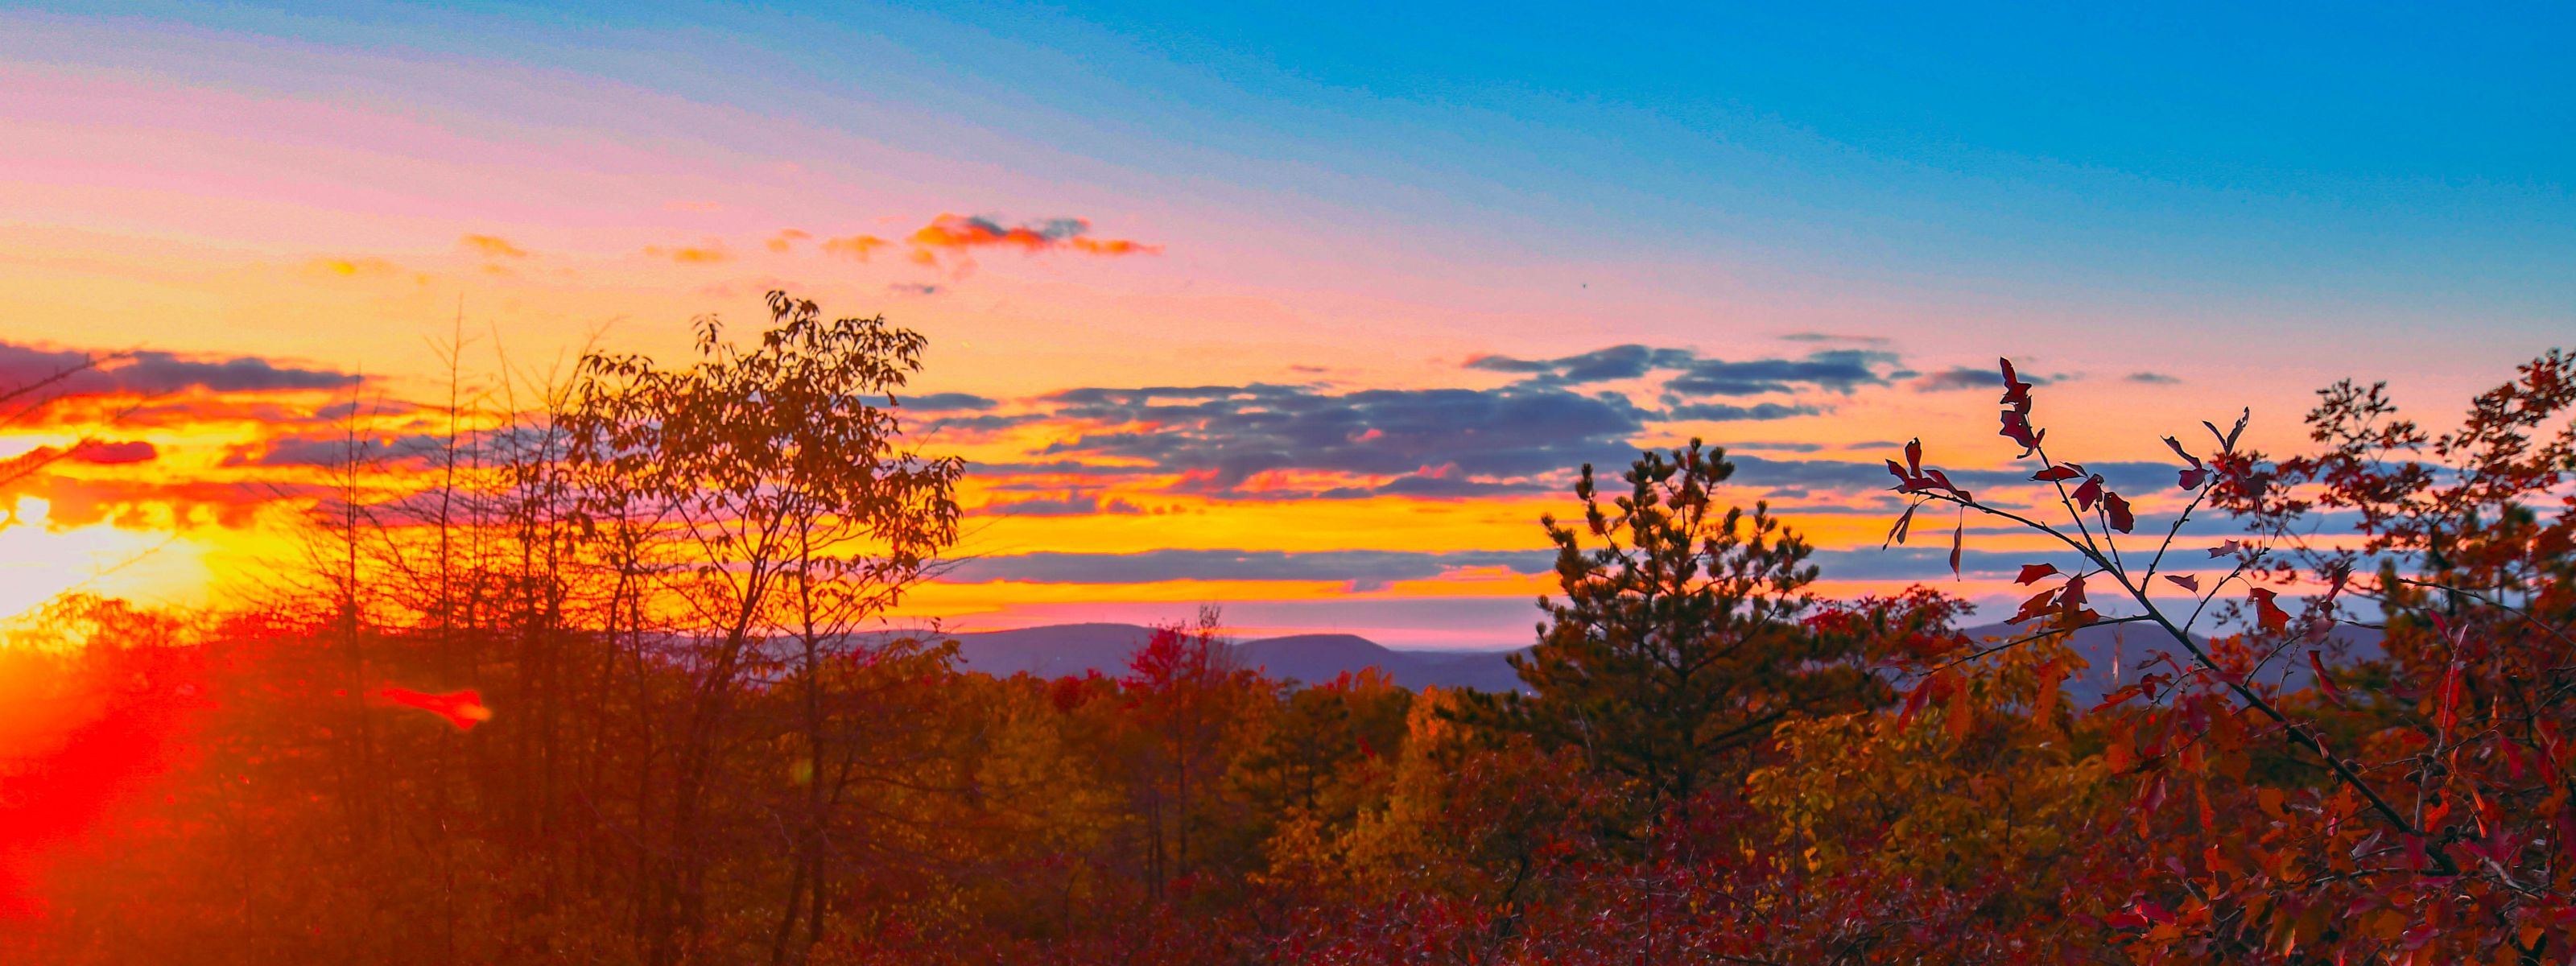 A sun sets over a forest creating an orange glow against a pink and blue sky.